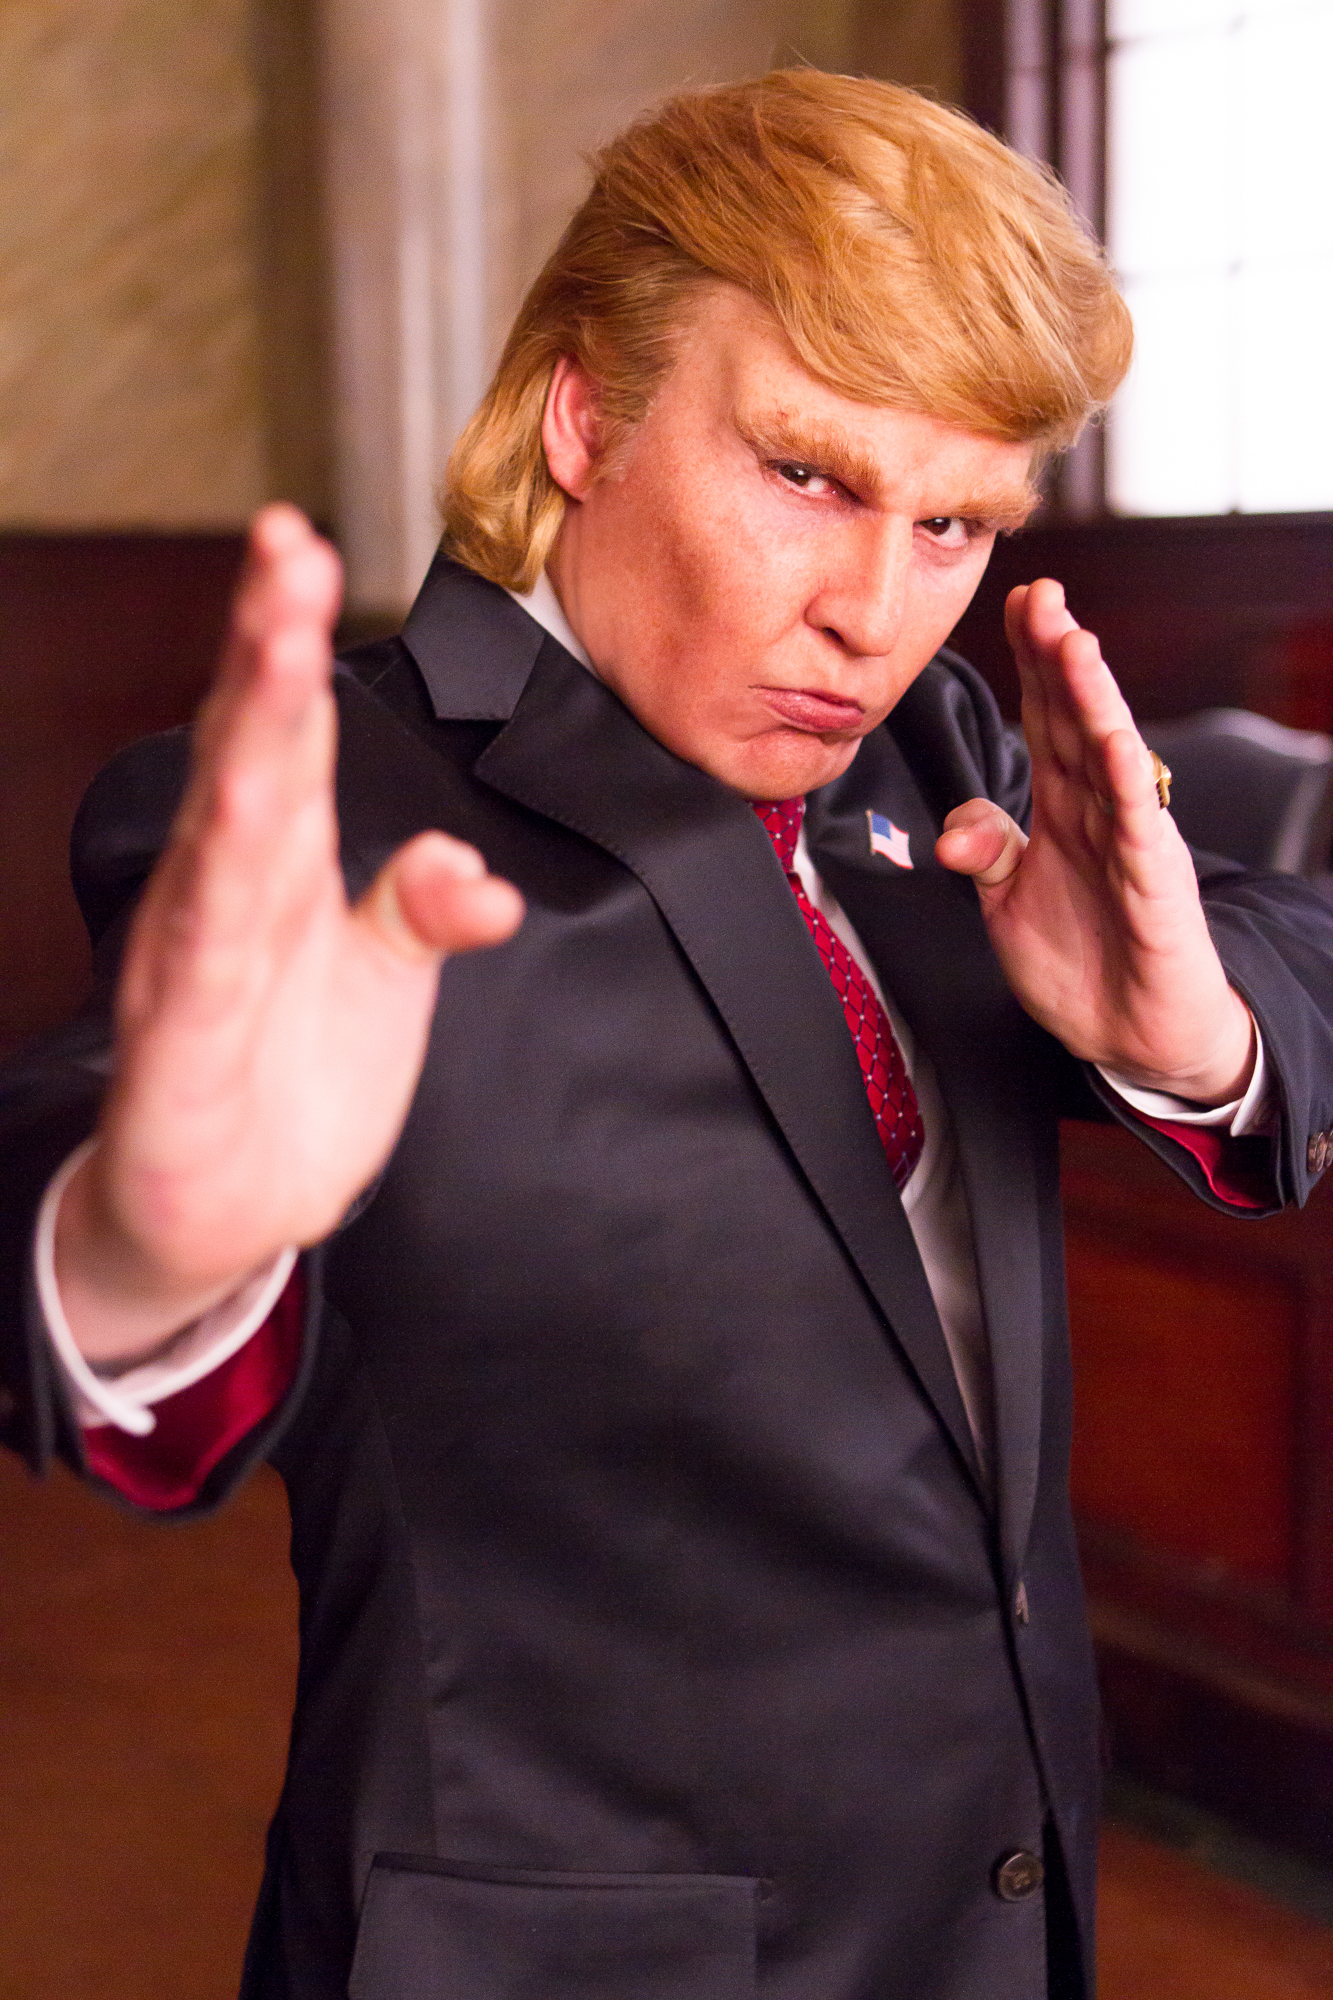 Johnny Depp dressed as Donald Trump in Funny or Die's Donald Trump’s The Art of the Deal: The Movie on Feb. 10, 2016.